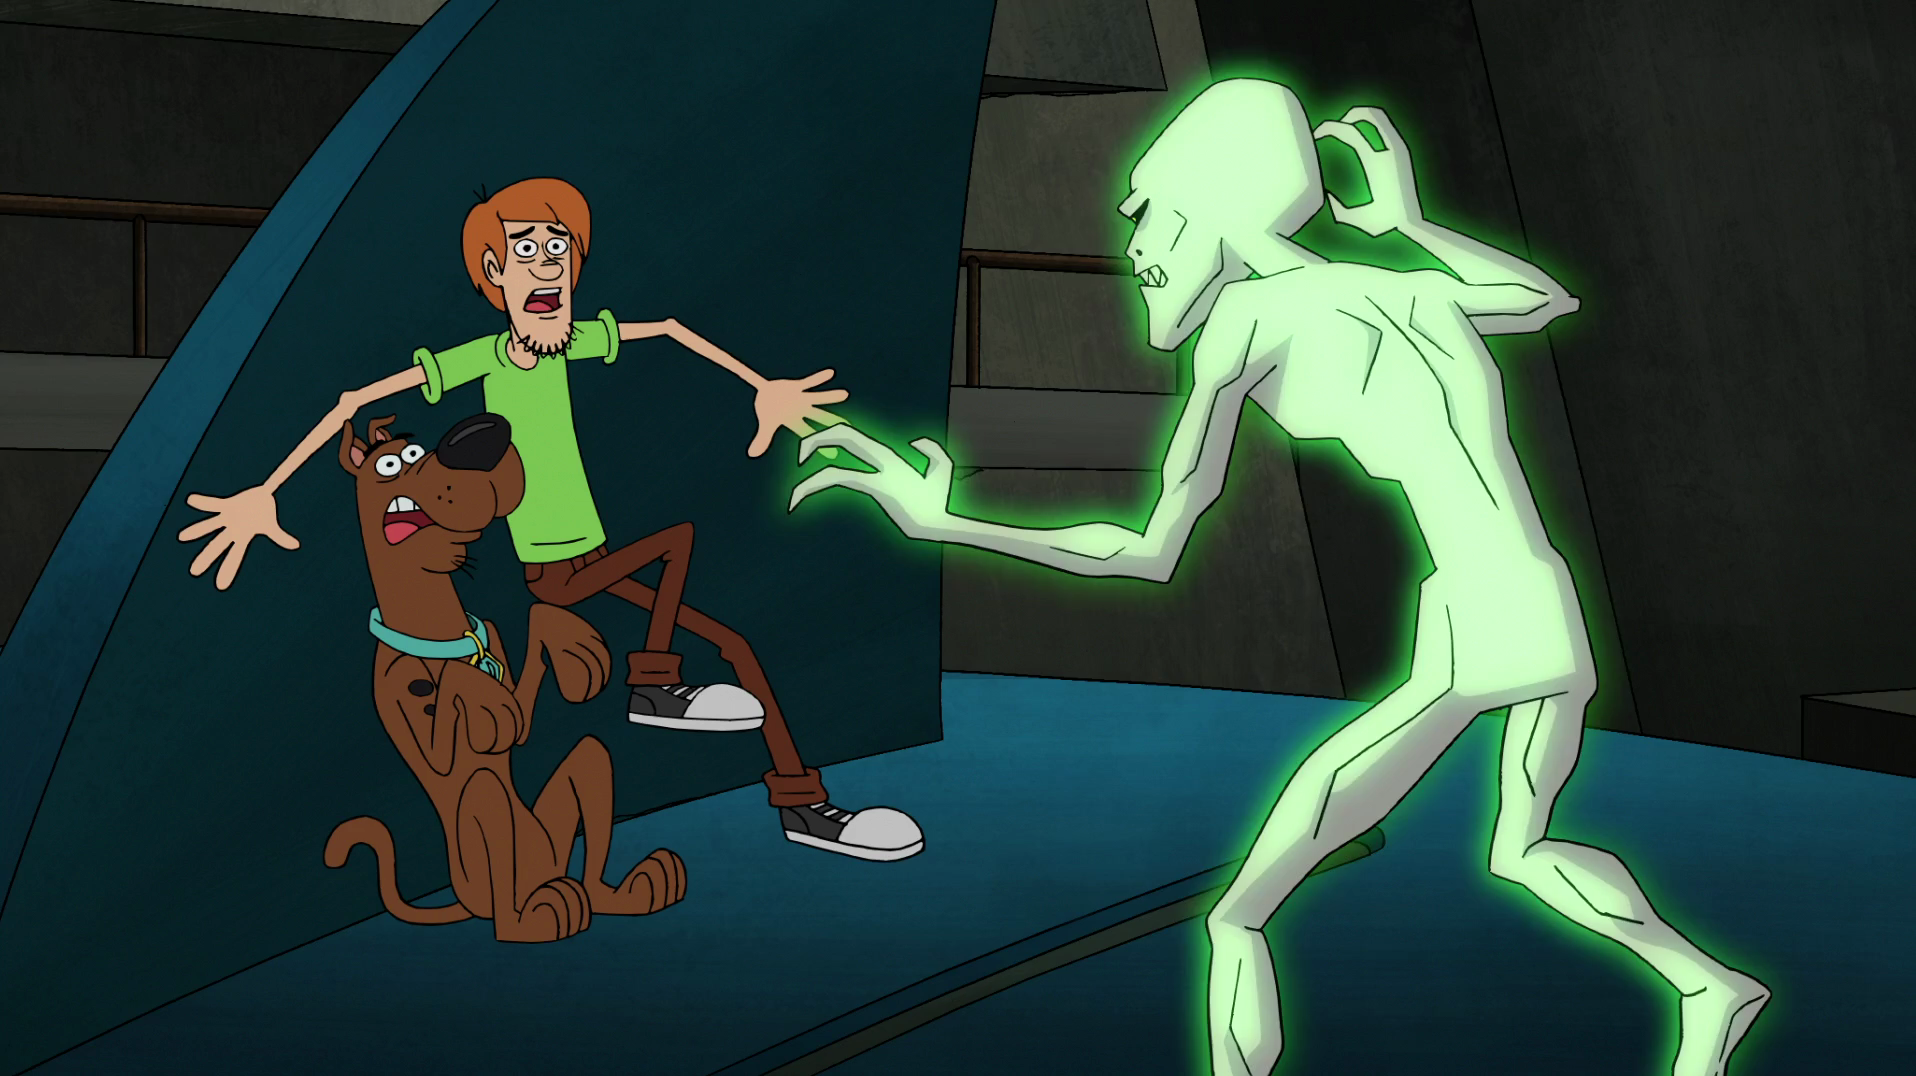 Complete name : Be Cool Scooby-Doo 1080p\Be Cool Scooby-Doo! 